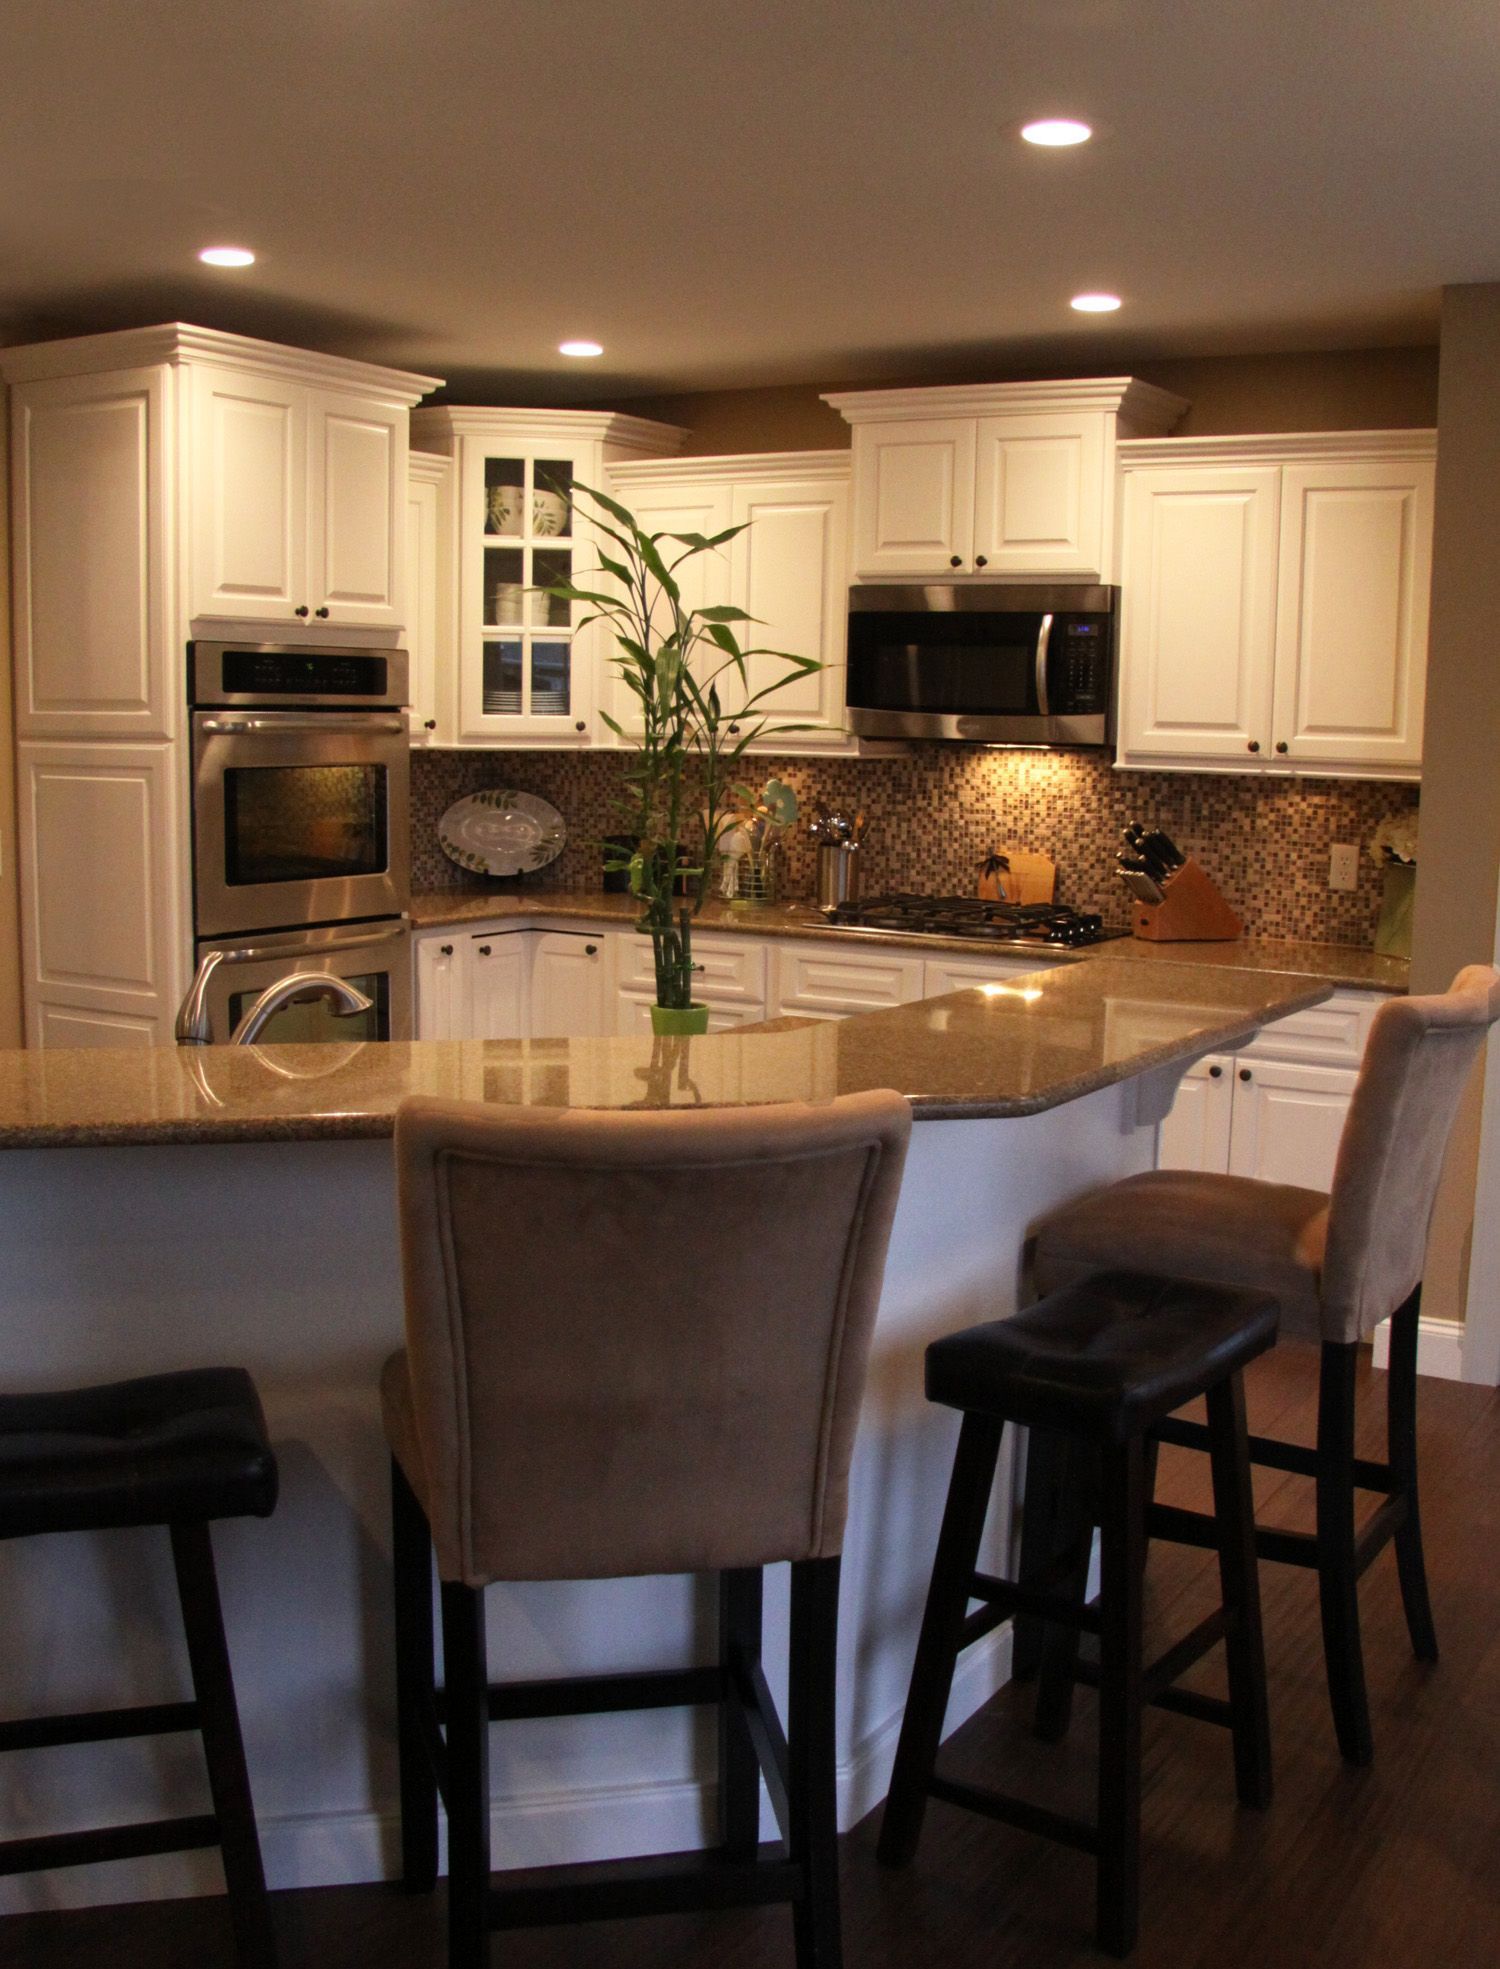 The lighting in this kitchen is gorgeous!  Truly, it makes all the difference. #